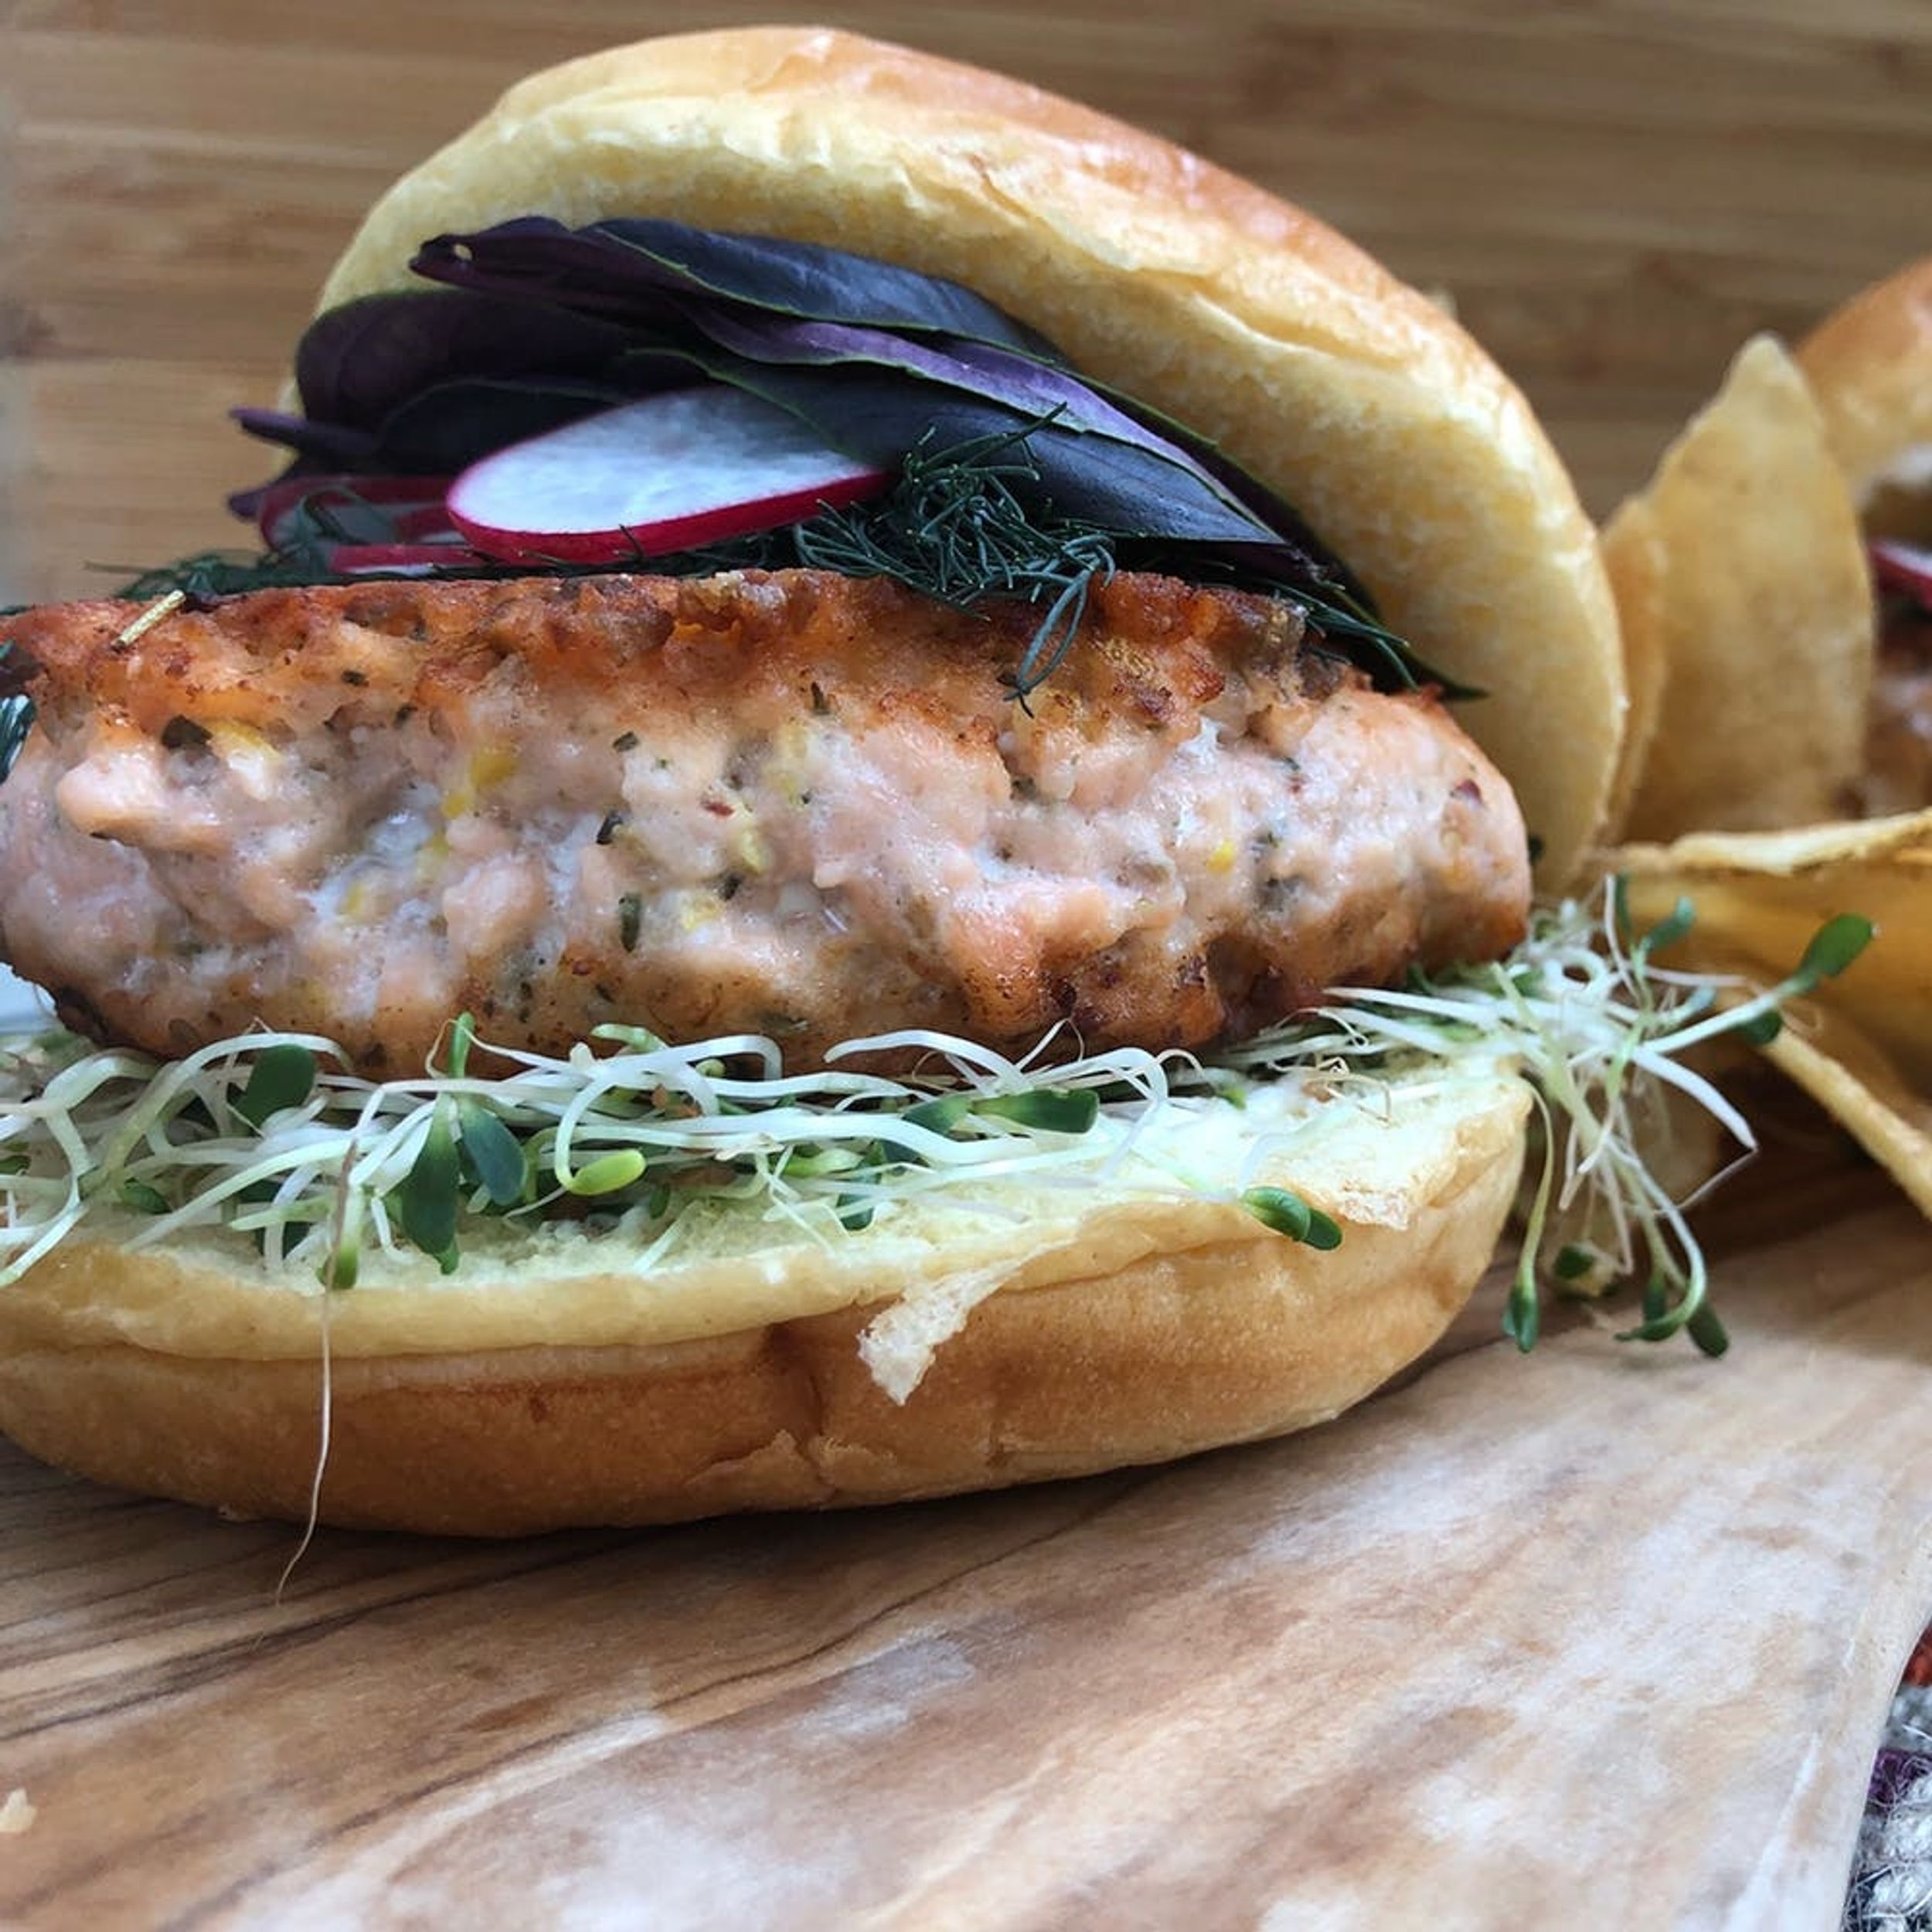 Make These Salmon Burgers from Scratch in Just 20 Minutes